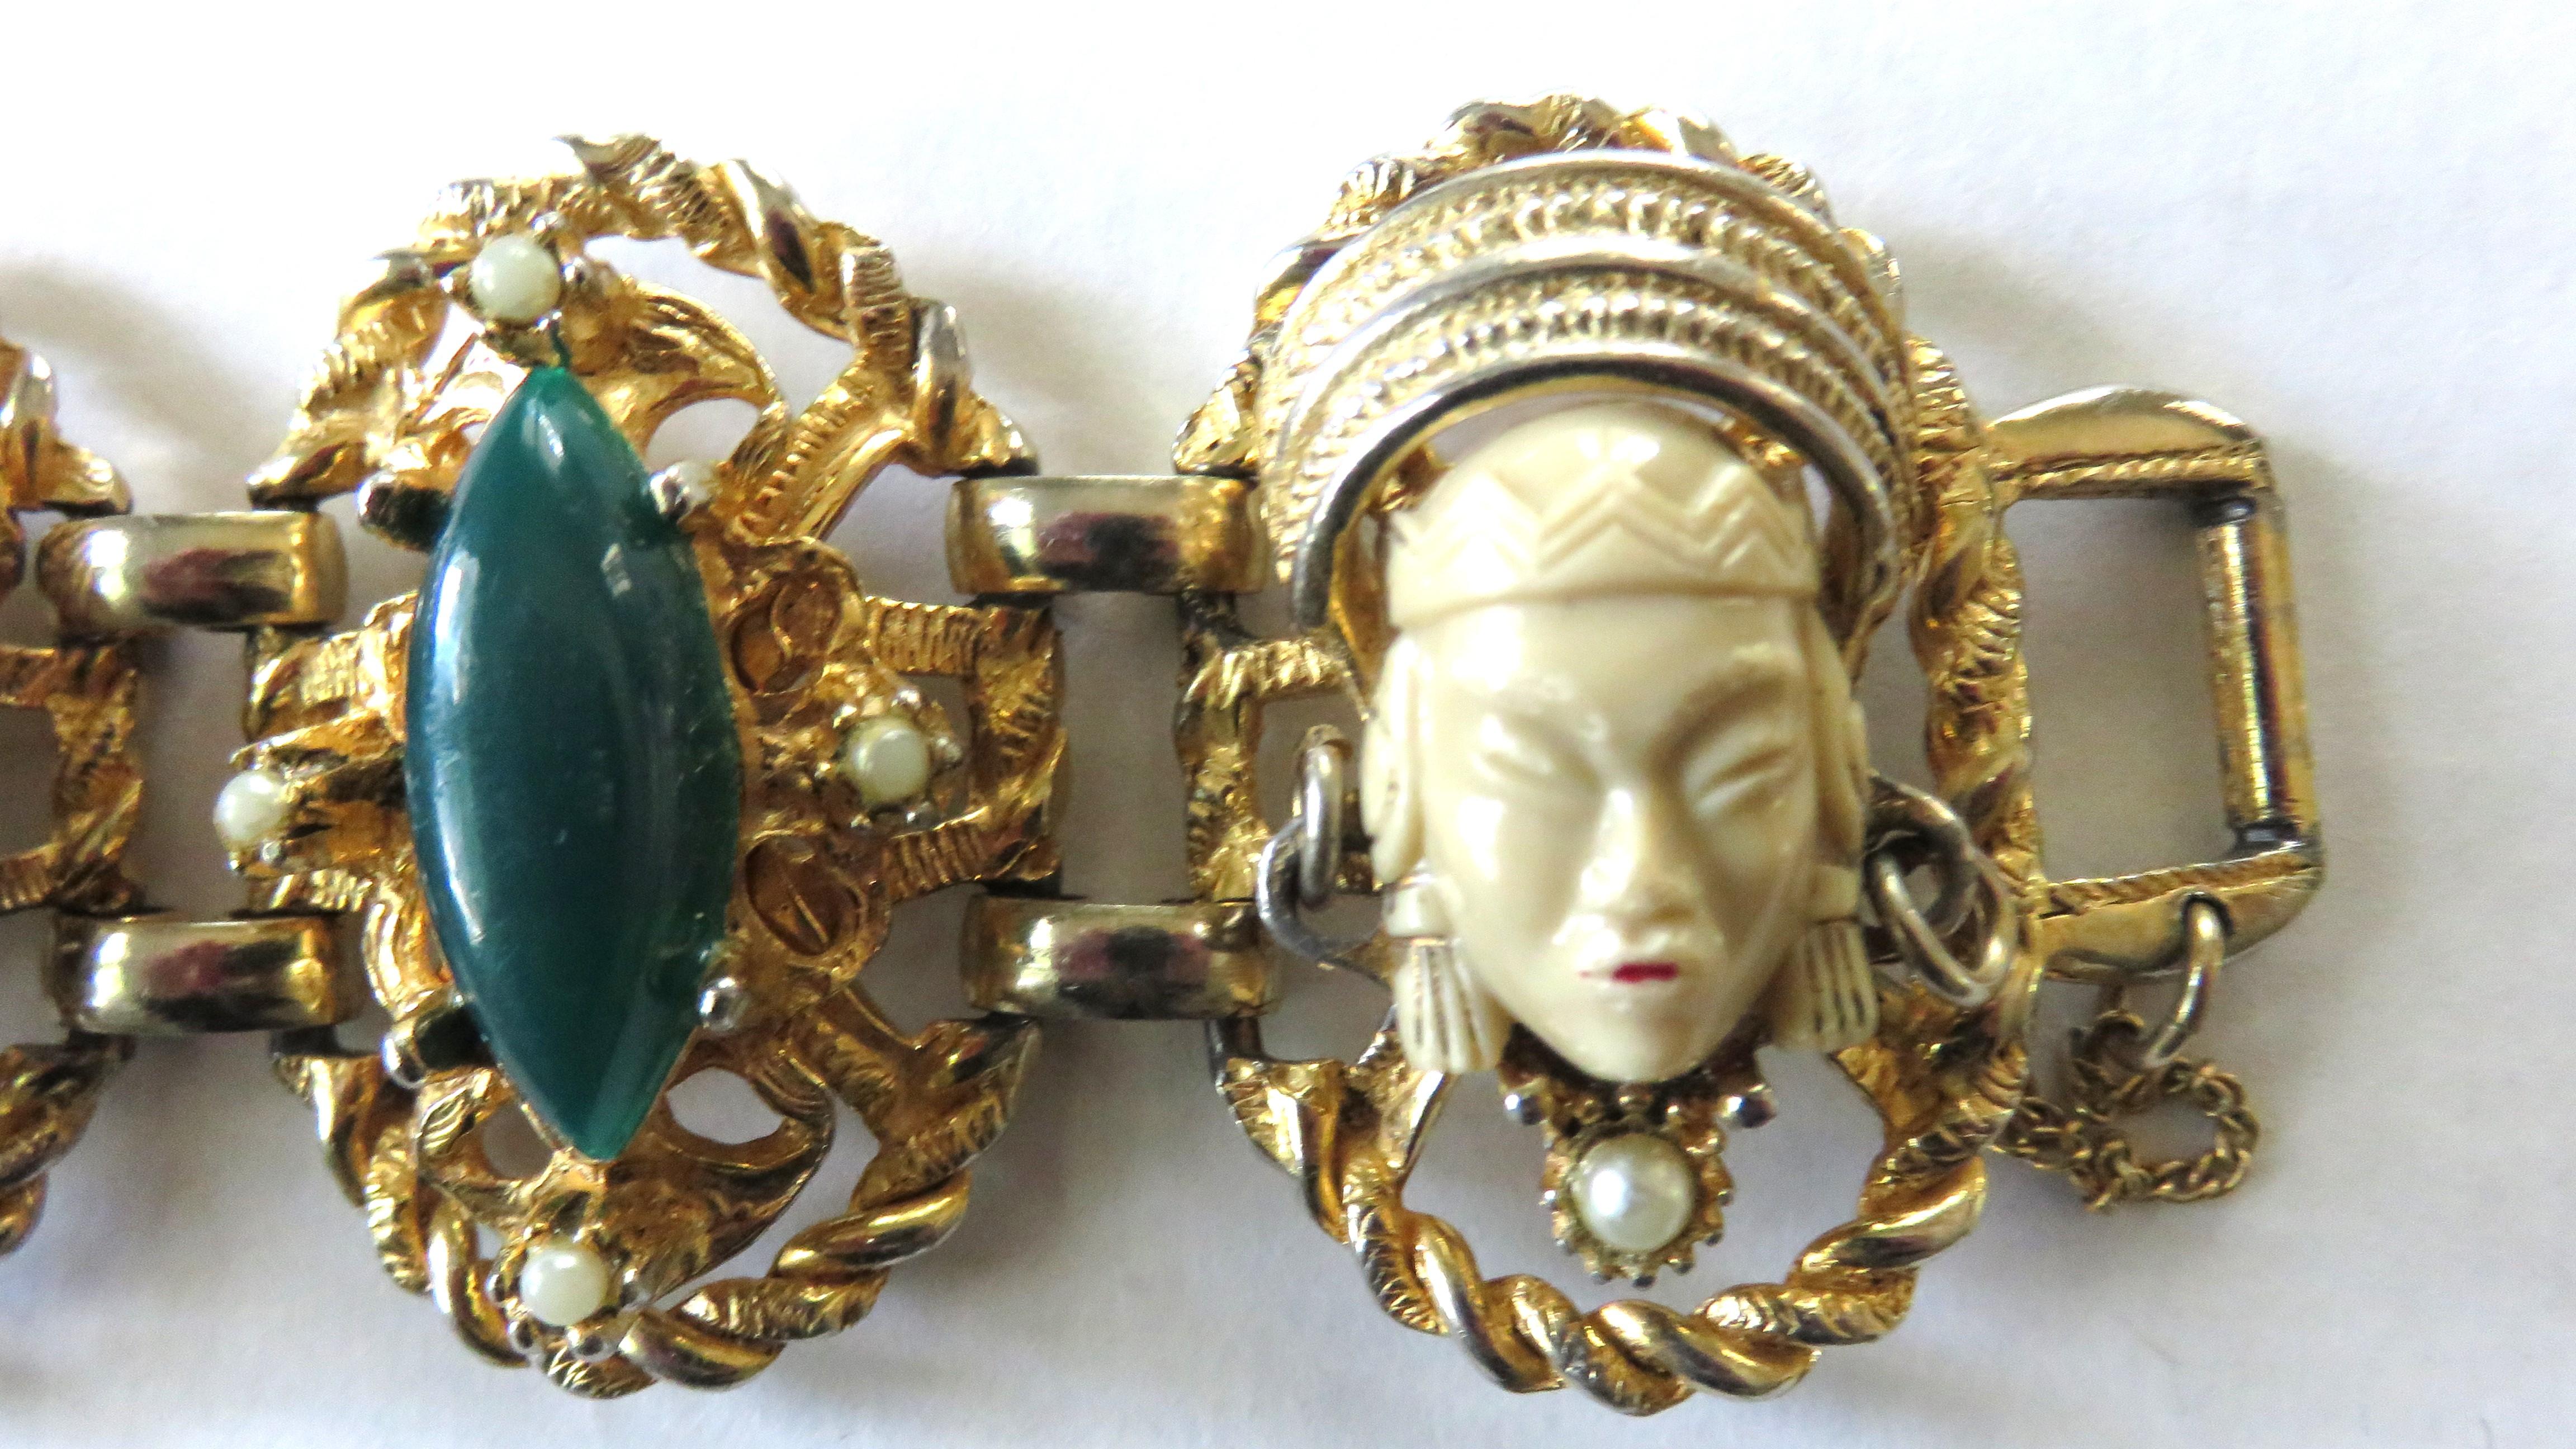 Selro Selini 1950s Elaborate Asian Princess Necklace, Bracelet and Earrings Set  In Good Condition For Sale In Water Mill, NY